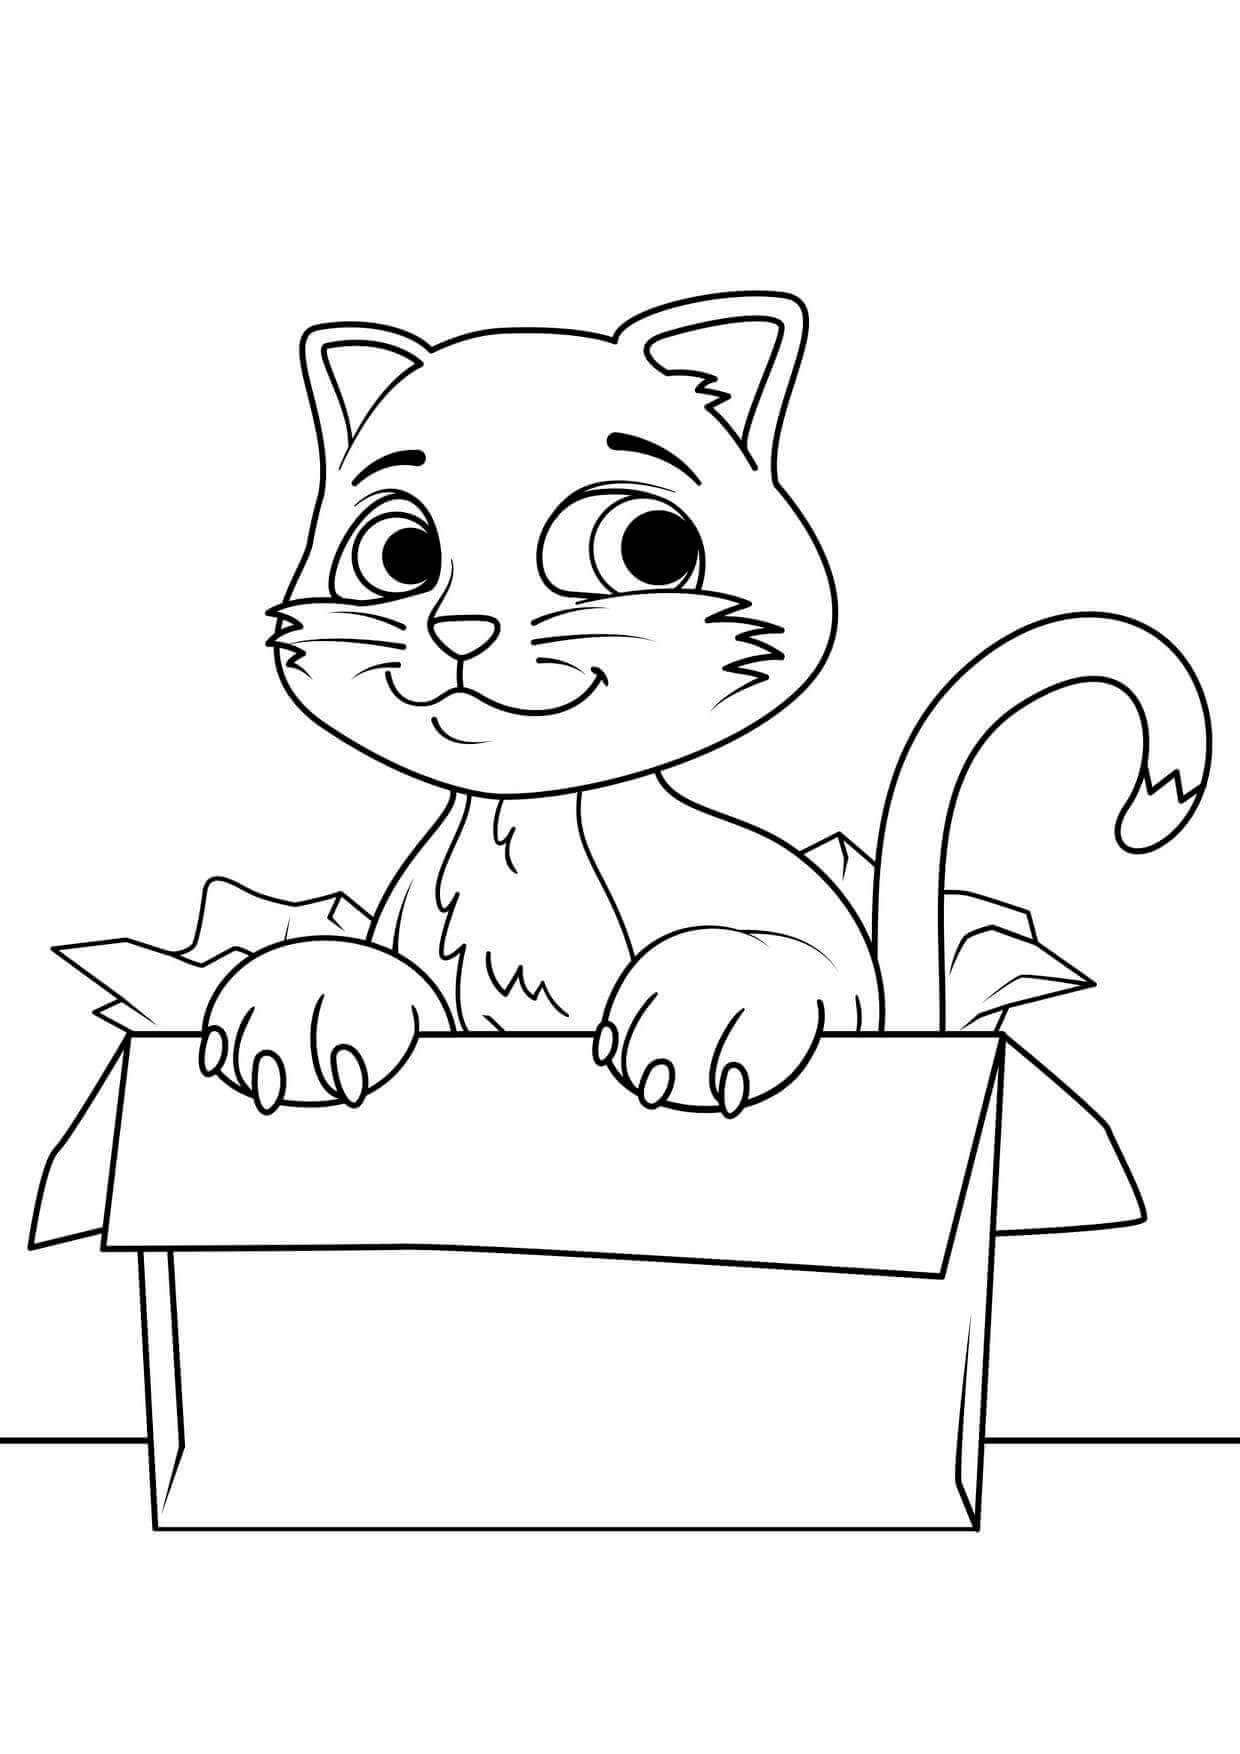 Cool Coloring Pages For Girls
 Free Printable Coloring Pages For Girls